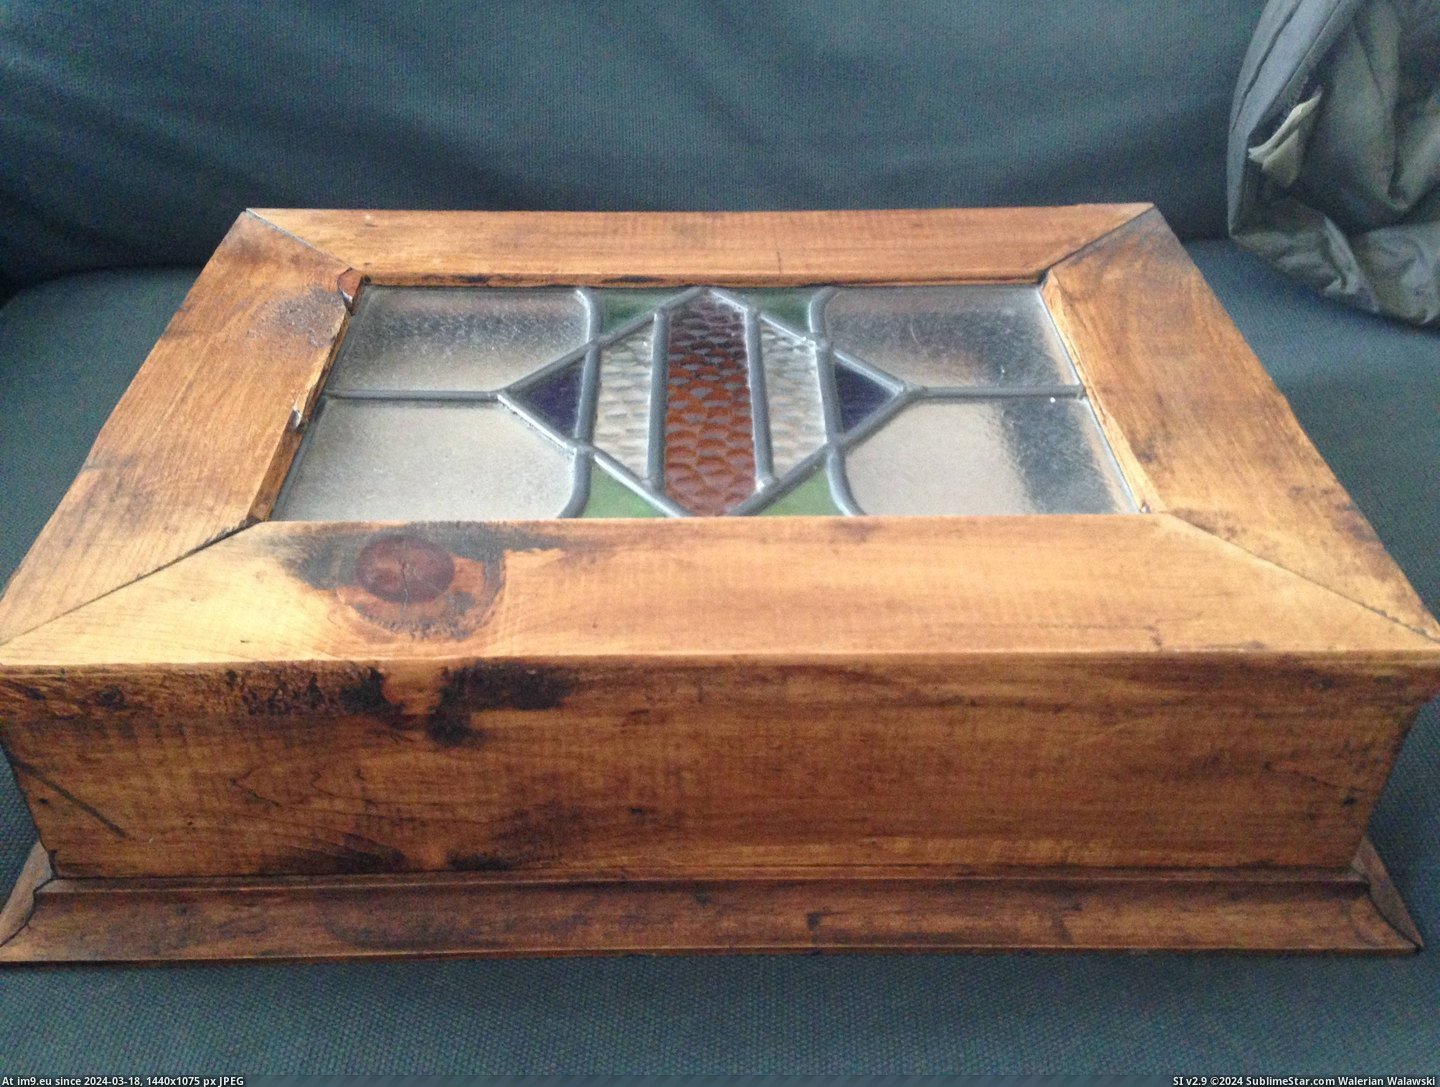 #Box #Turned #Gift #Passage #Elders #Rite #Received #Ten #Ceremony [Pics] When I turned 13, I had a rite of passage ceremony, at which I received this, 'Box Of The Elders,' as a gift. Almost ten  Pic. (Image of album My r/PICS favs))